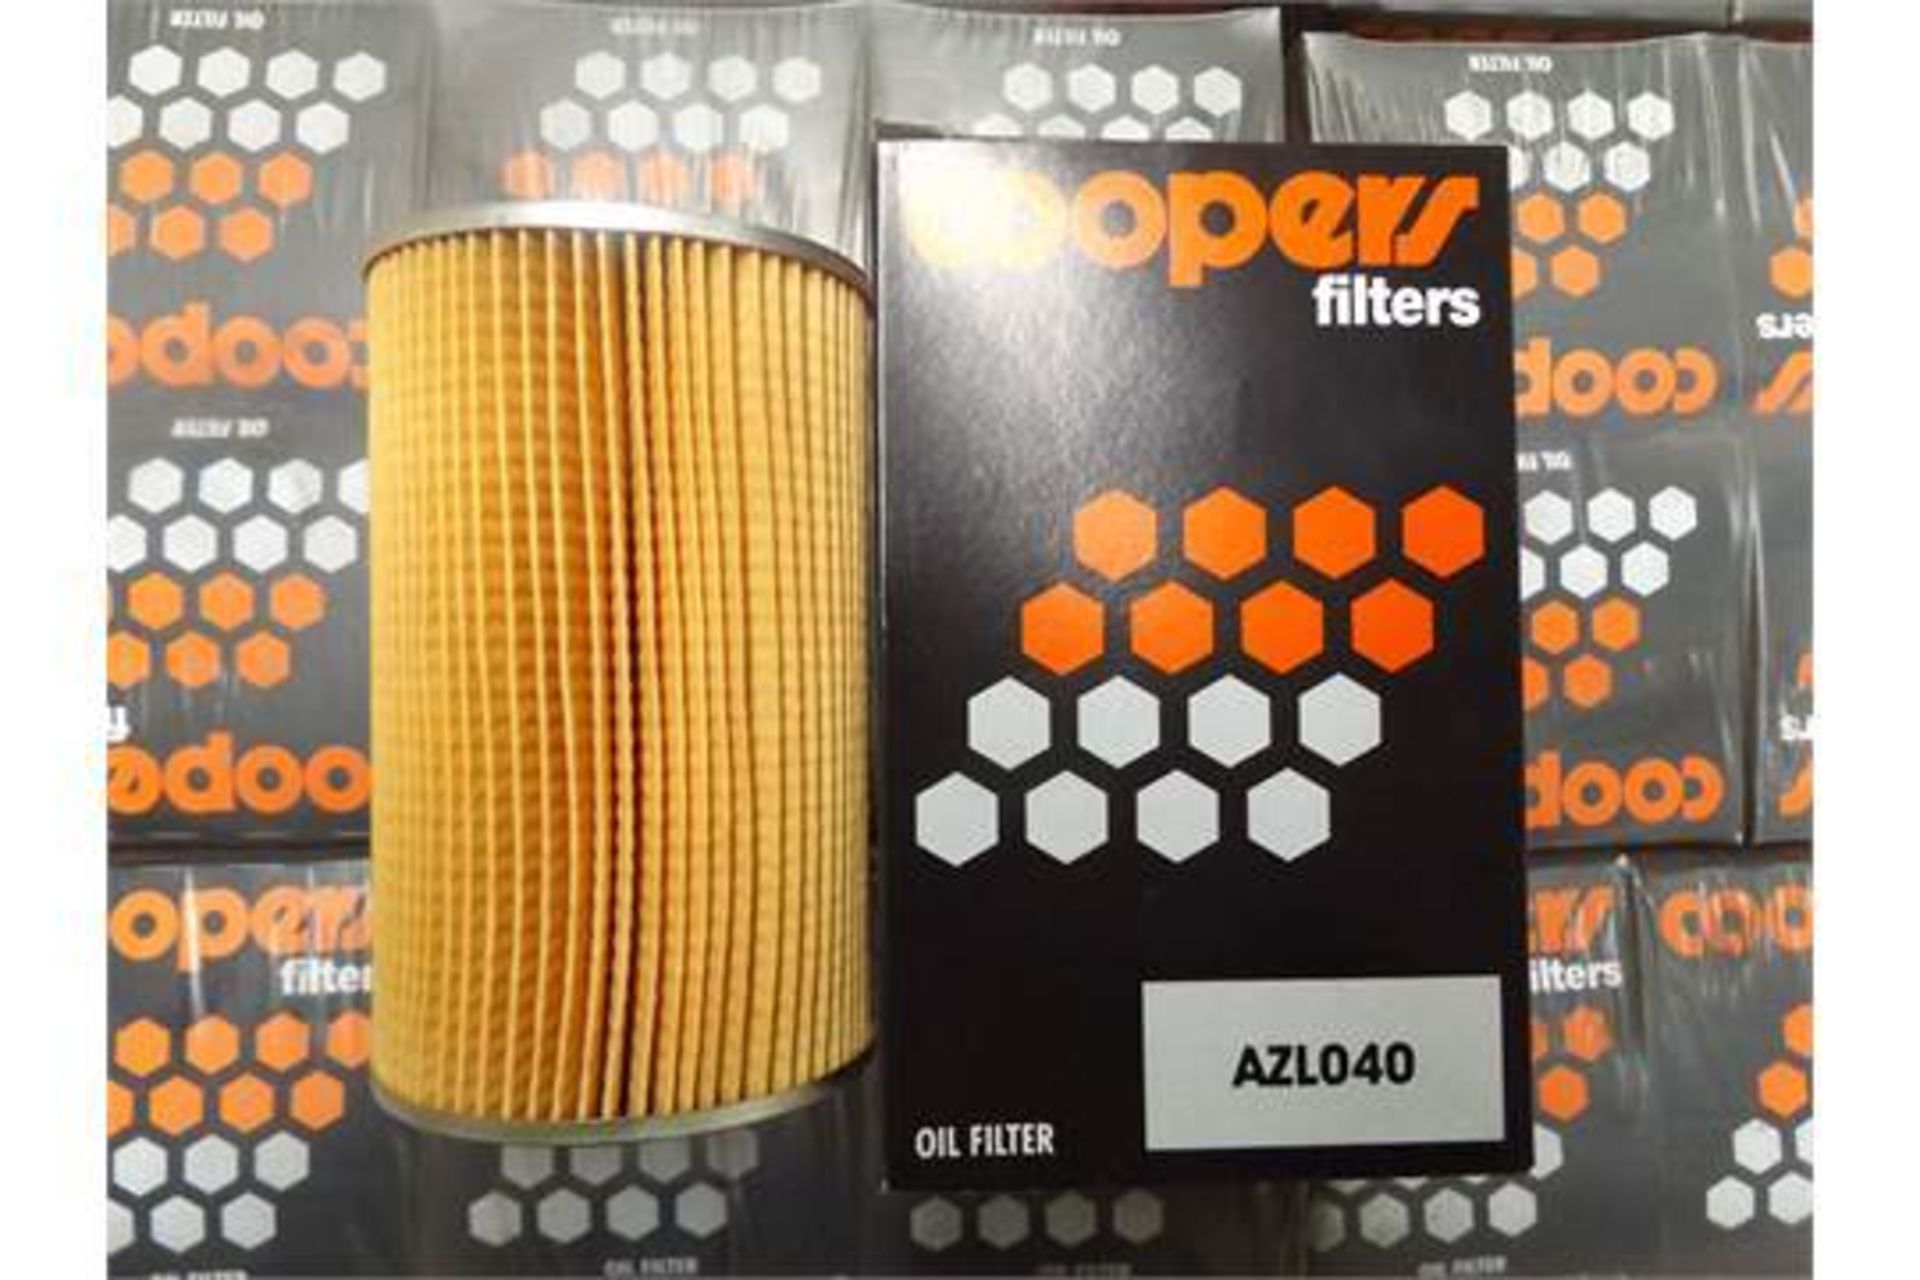 Approx. 480 x Coopers AZL040 Oil Filters - Image 2 of 5